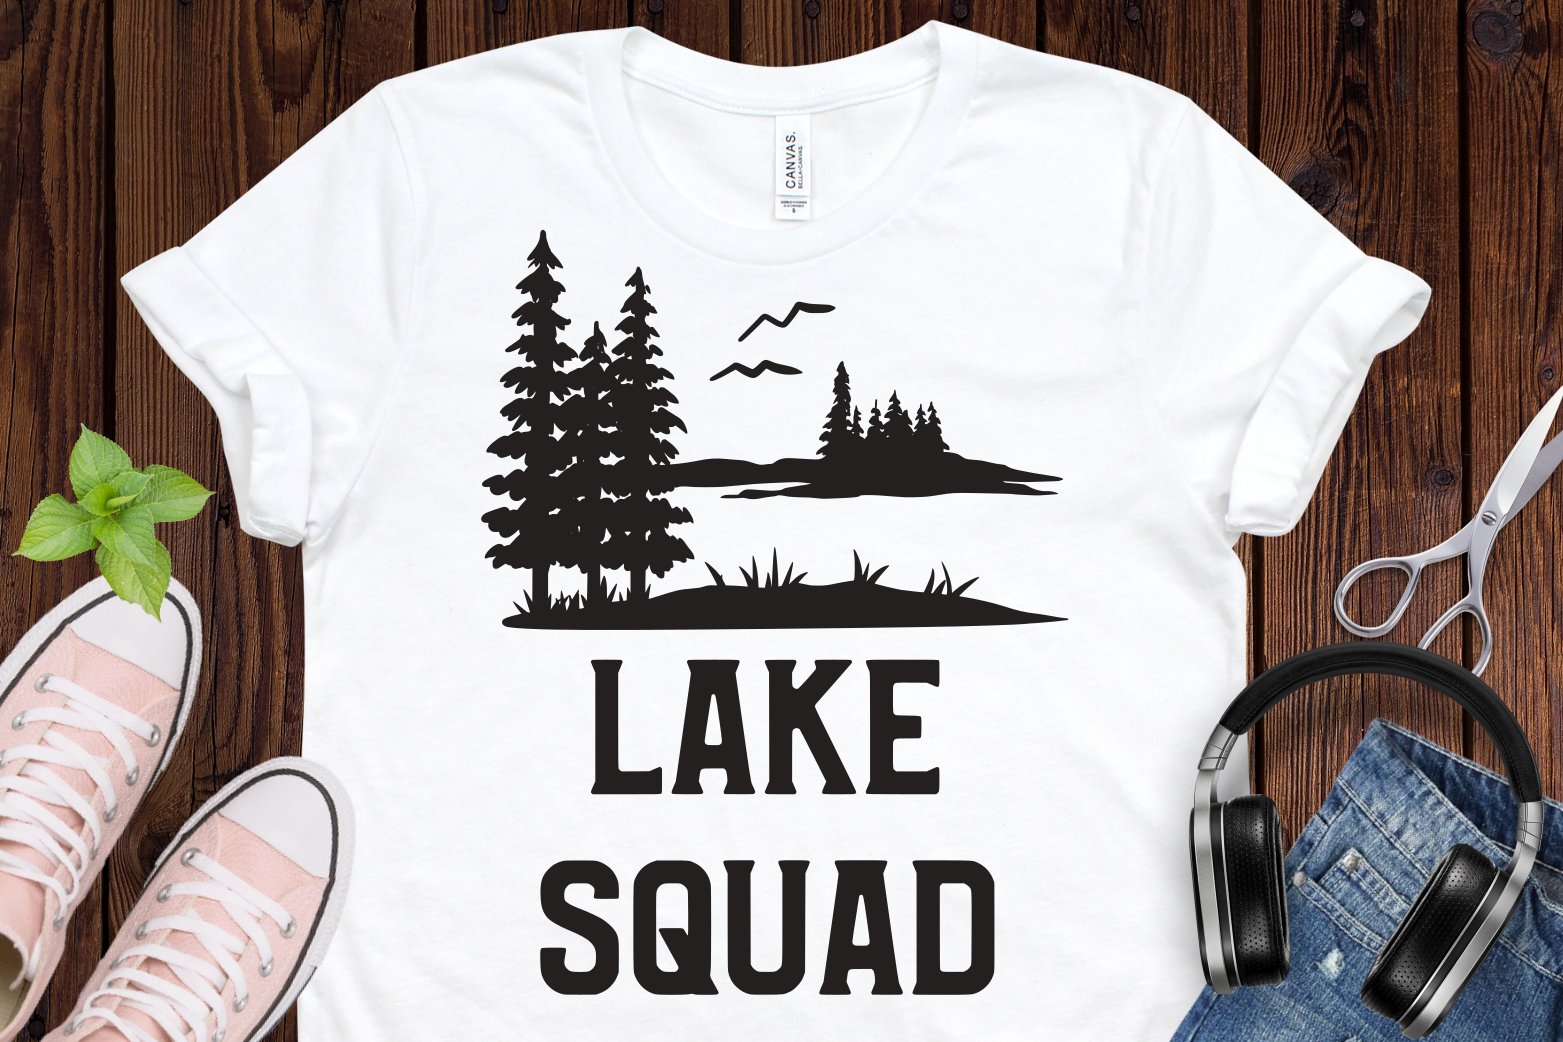 You will be a part of lake squad.